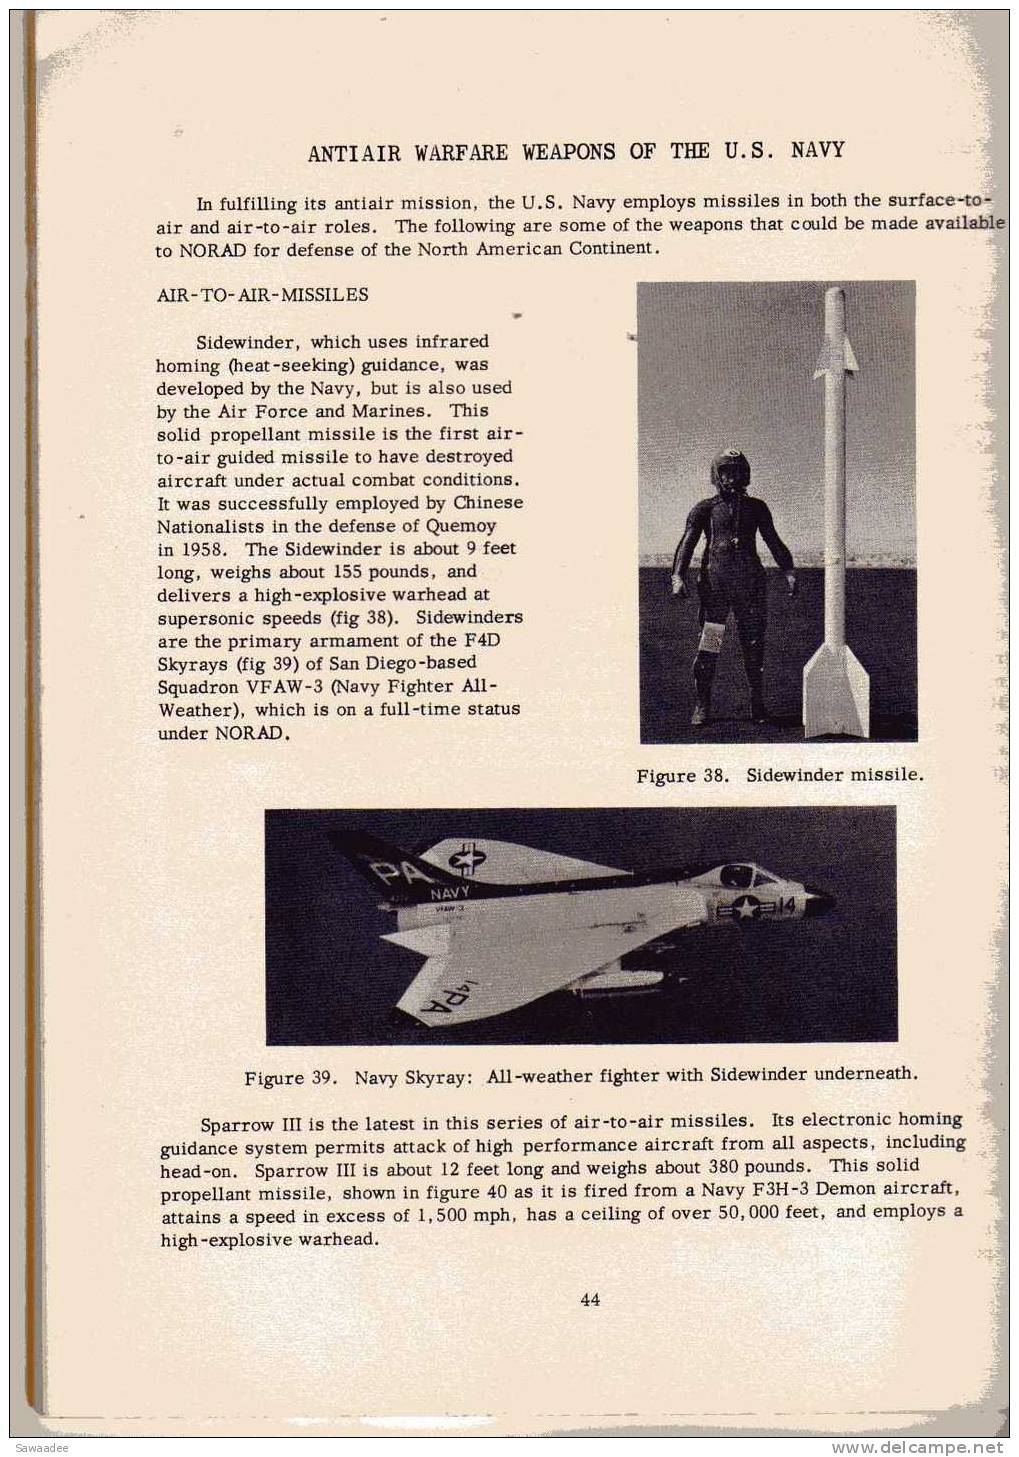 DOCUMENT - MILITARIA  - U.S. ARMY AIR DEFENSE -  FORT BLISS - TEXAS - 1962/63 - 78 PAGES - NBRES ILLUSTRATIONS, PHOTOS - Kriege US